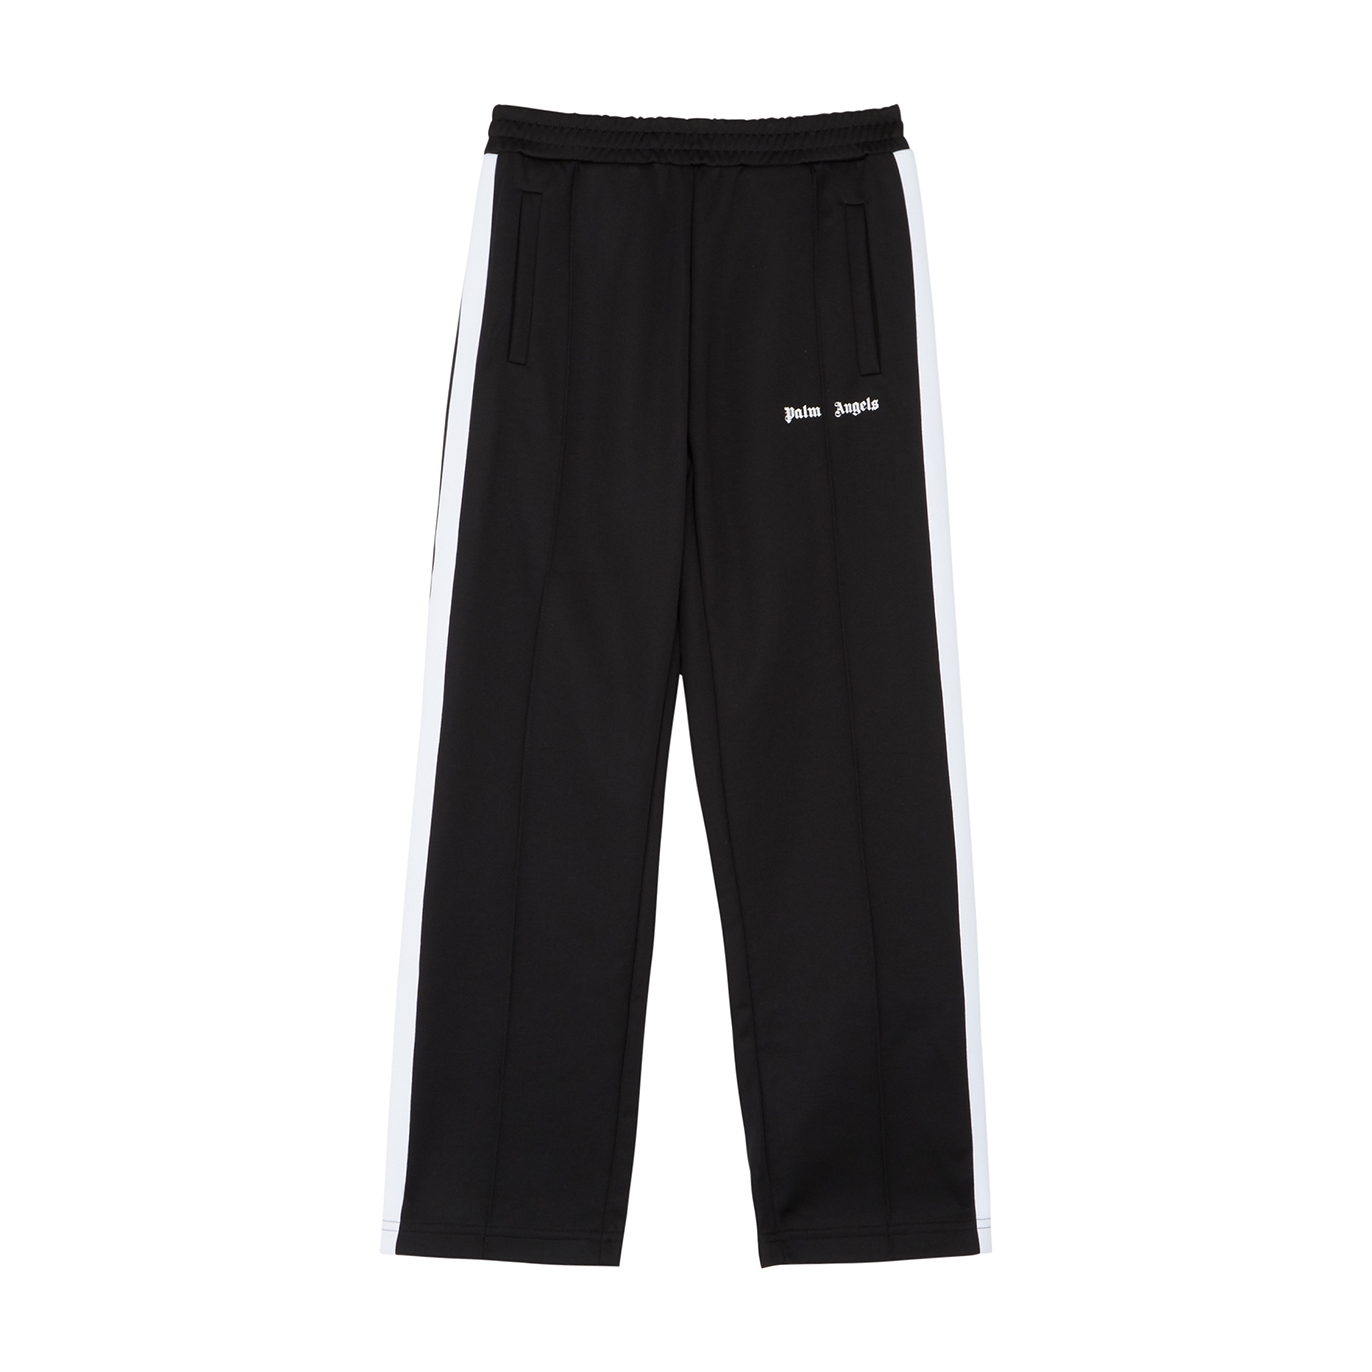 Palm Angels Kids Black Striped Jersey Track Pants (12 Years)